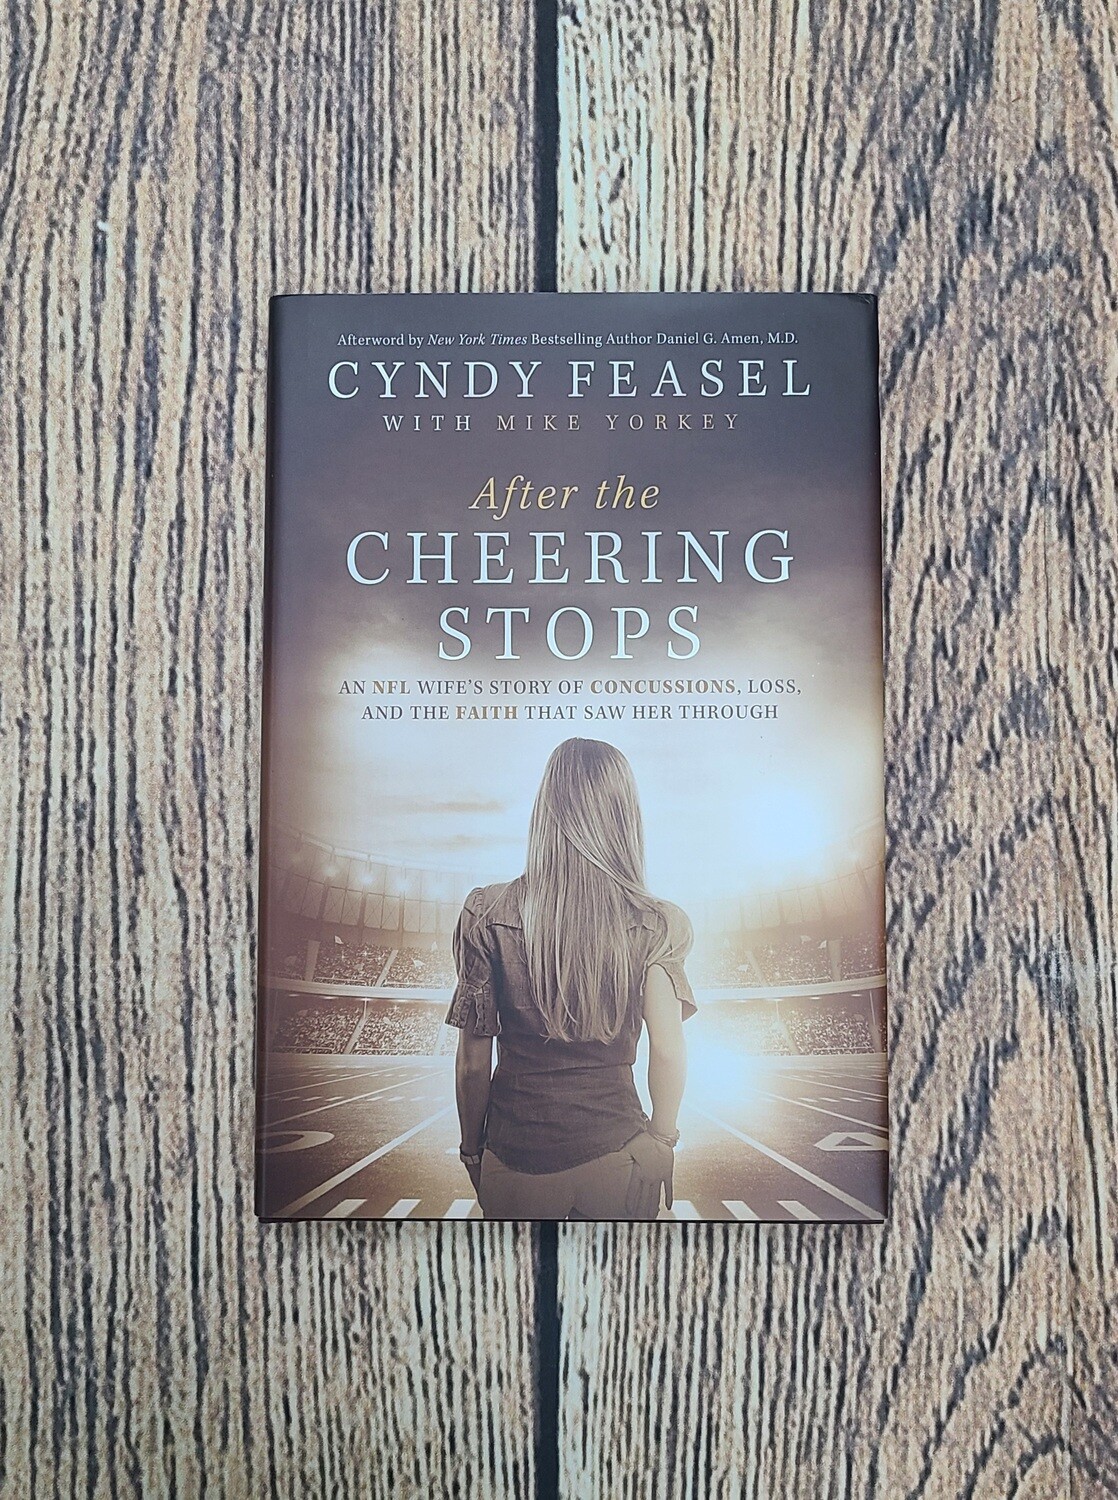 After the Cheering Stops: An NFL Wife's Story of Concussion, Loss, and the Faith that saw Her Through by Cyndy Feasel with Mike Yorkey